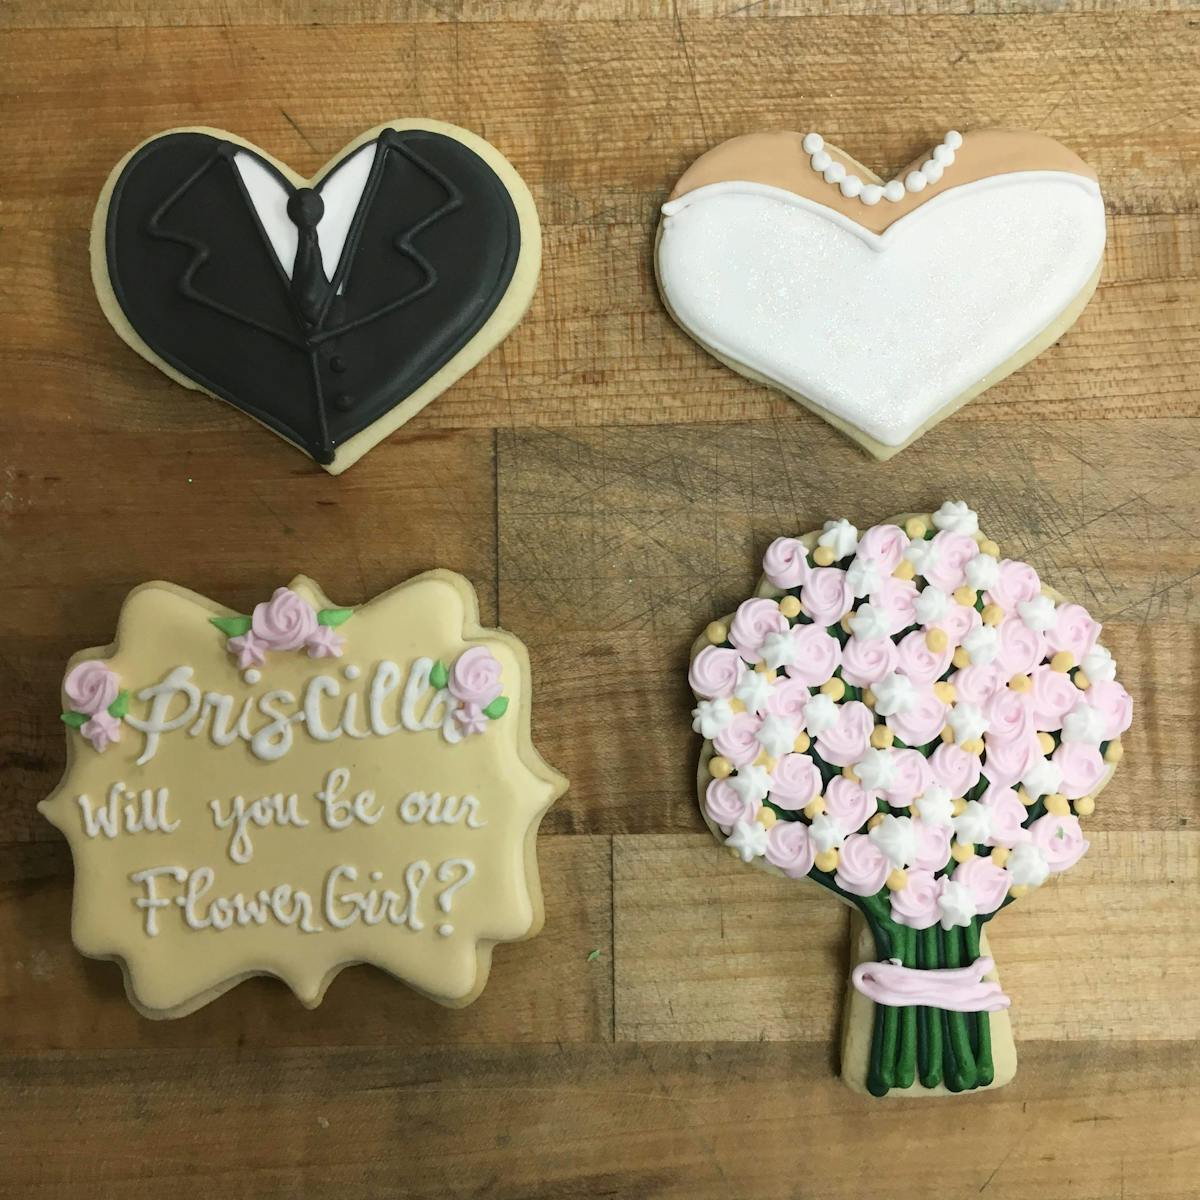 a decorated cookies bridal/wedding on a table